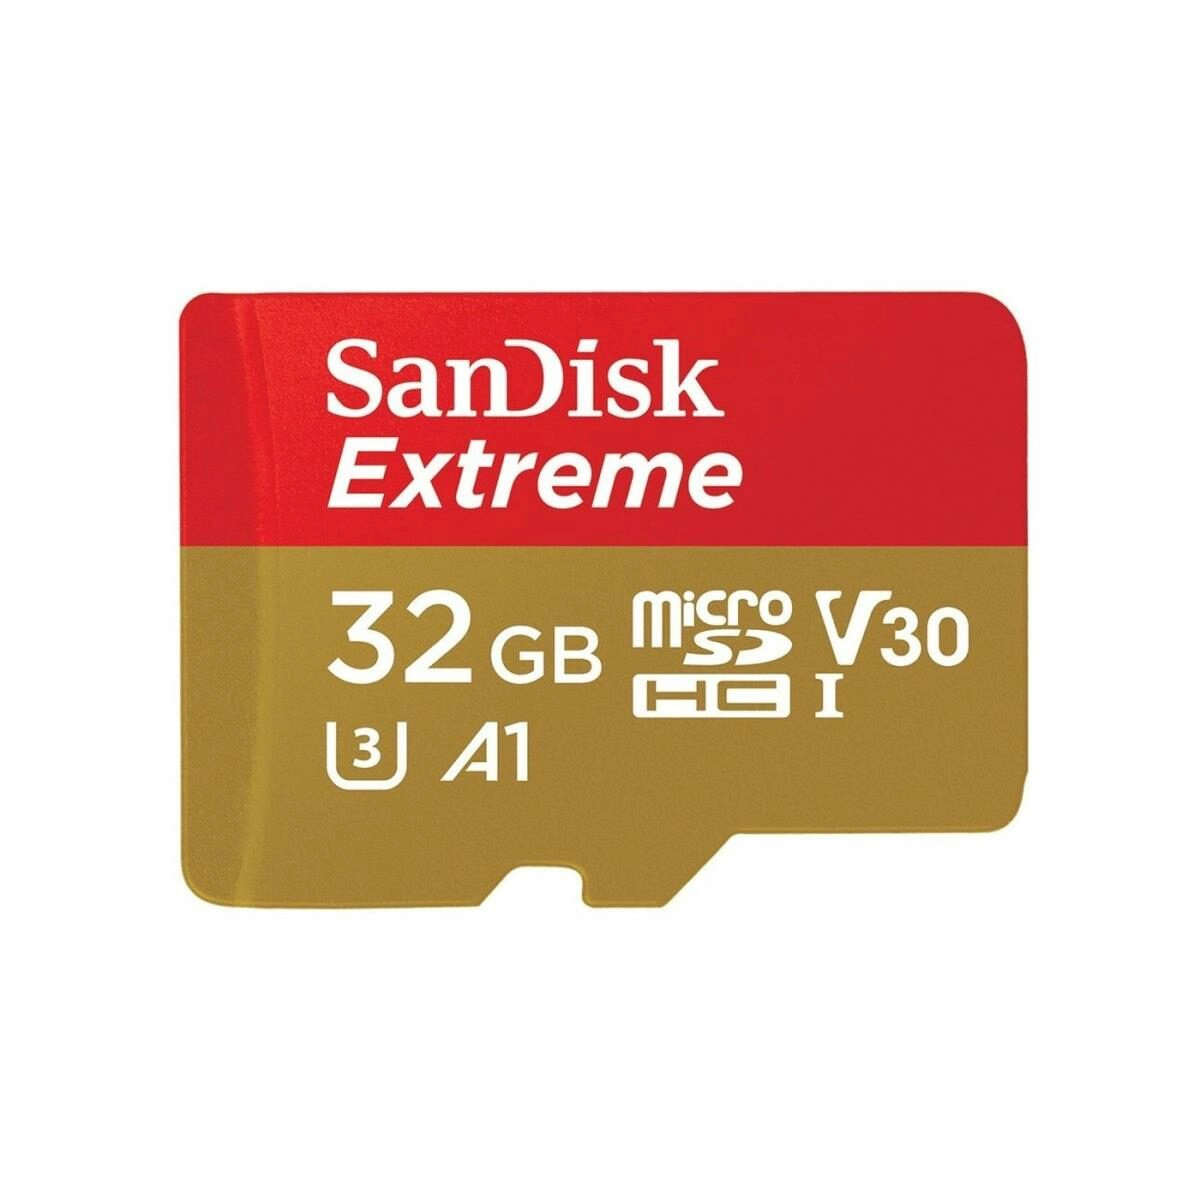 SanDisk Extreme microSD UHS-I Card 32GB Twin Pack